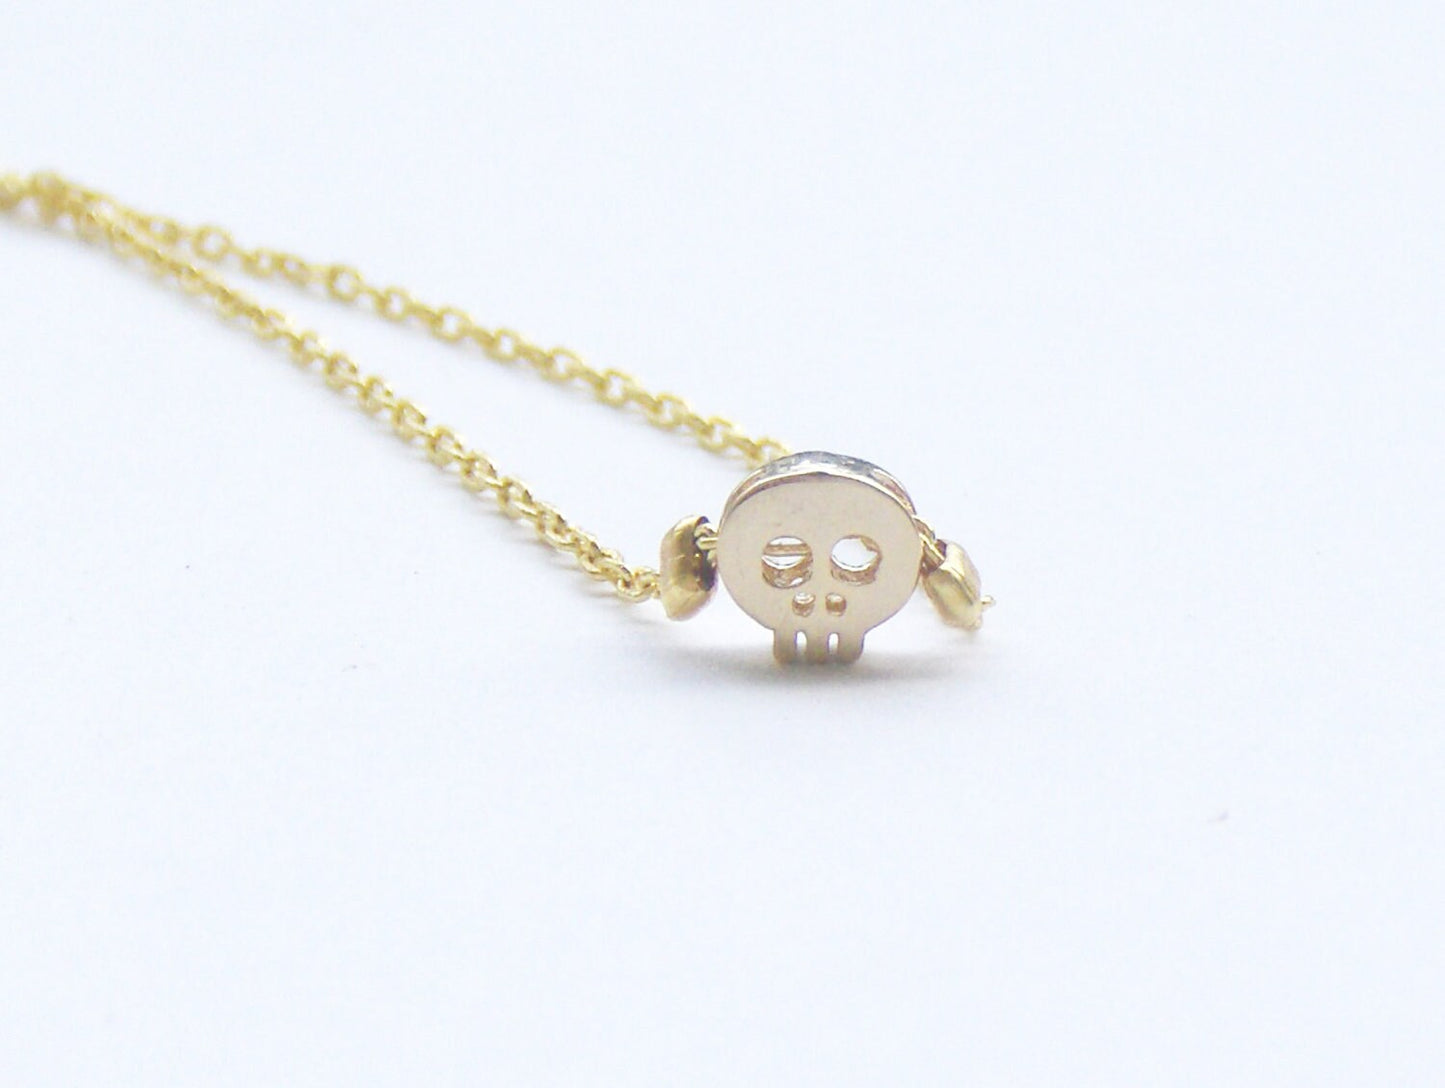 Mini Skull Bracelet in Gold - 16K gold plated chain and charm